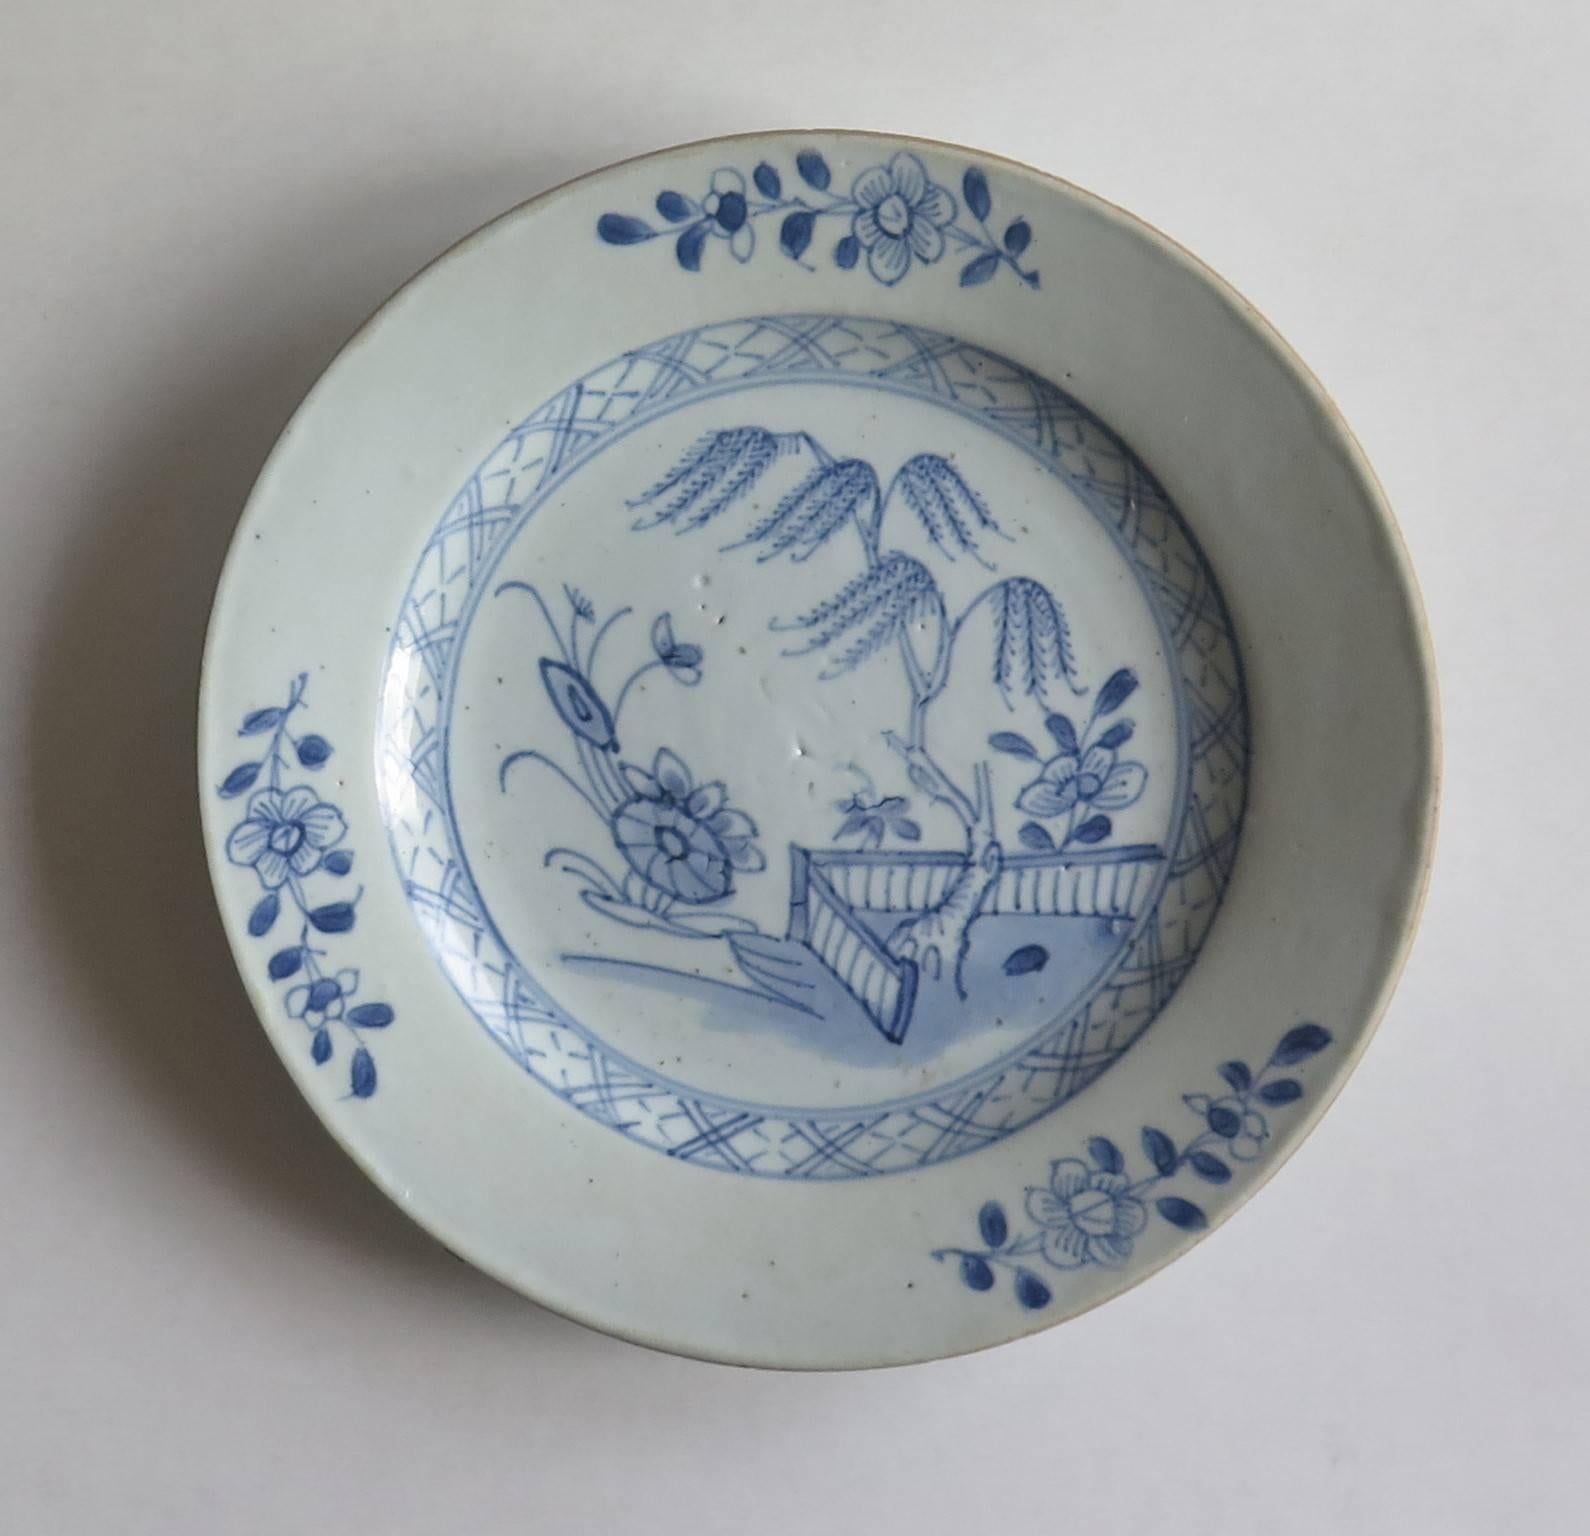 This is a Chinese porcelain blue and white side plate which we date to the mid-18th century or possibly earlier.

The plate is hand-painted in a free-flowing style with varying shades of cobalt blue. The decoration features a willow tree and other